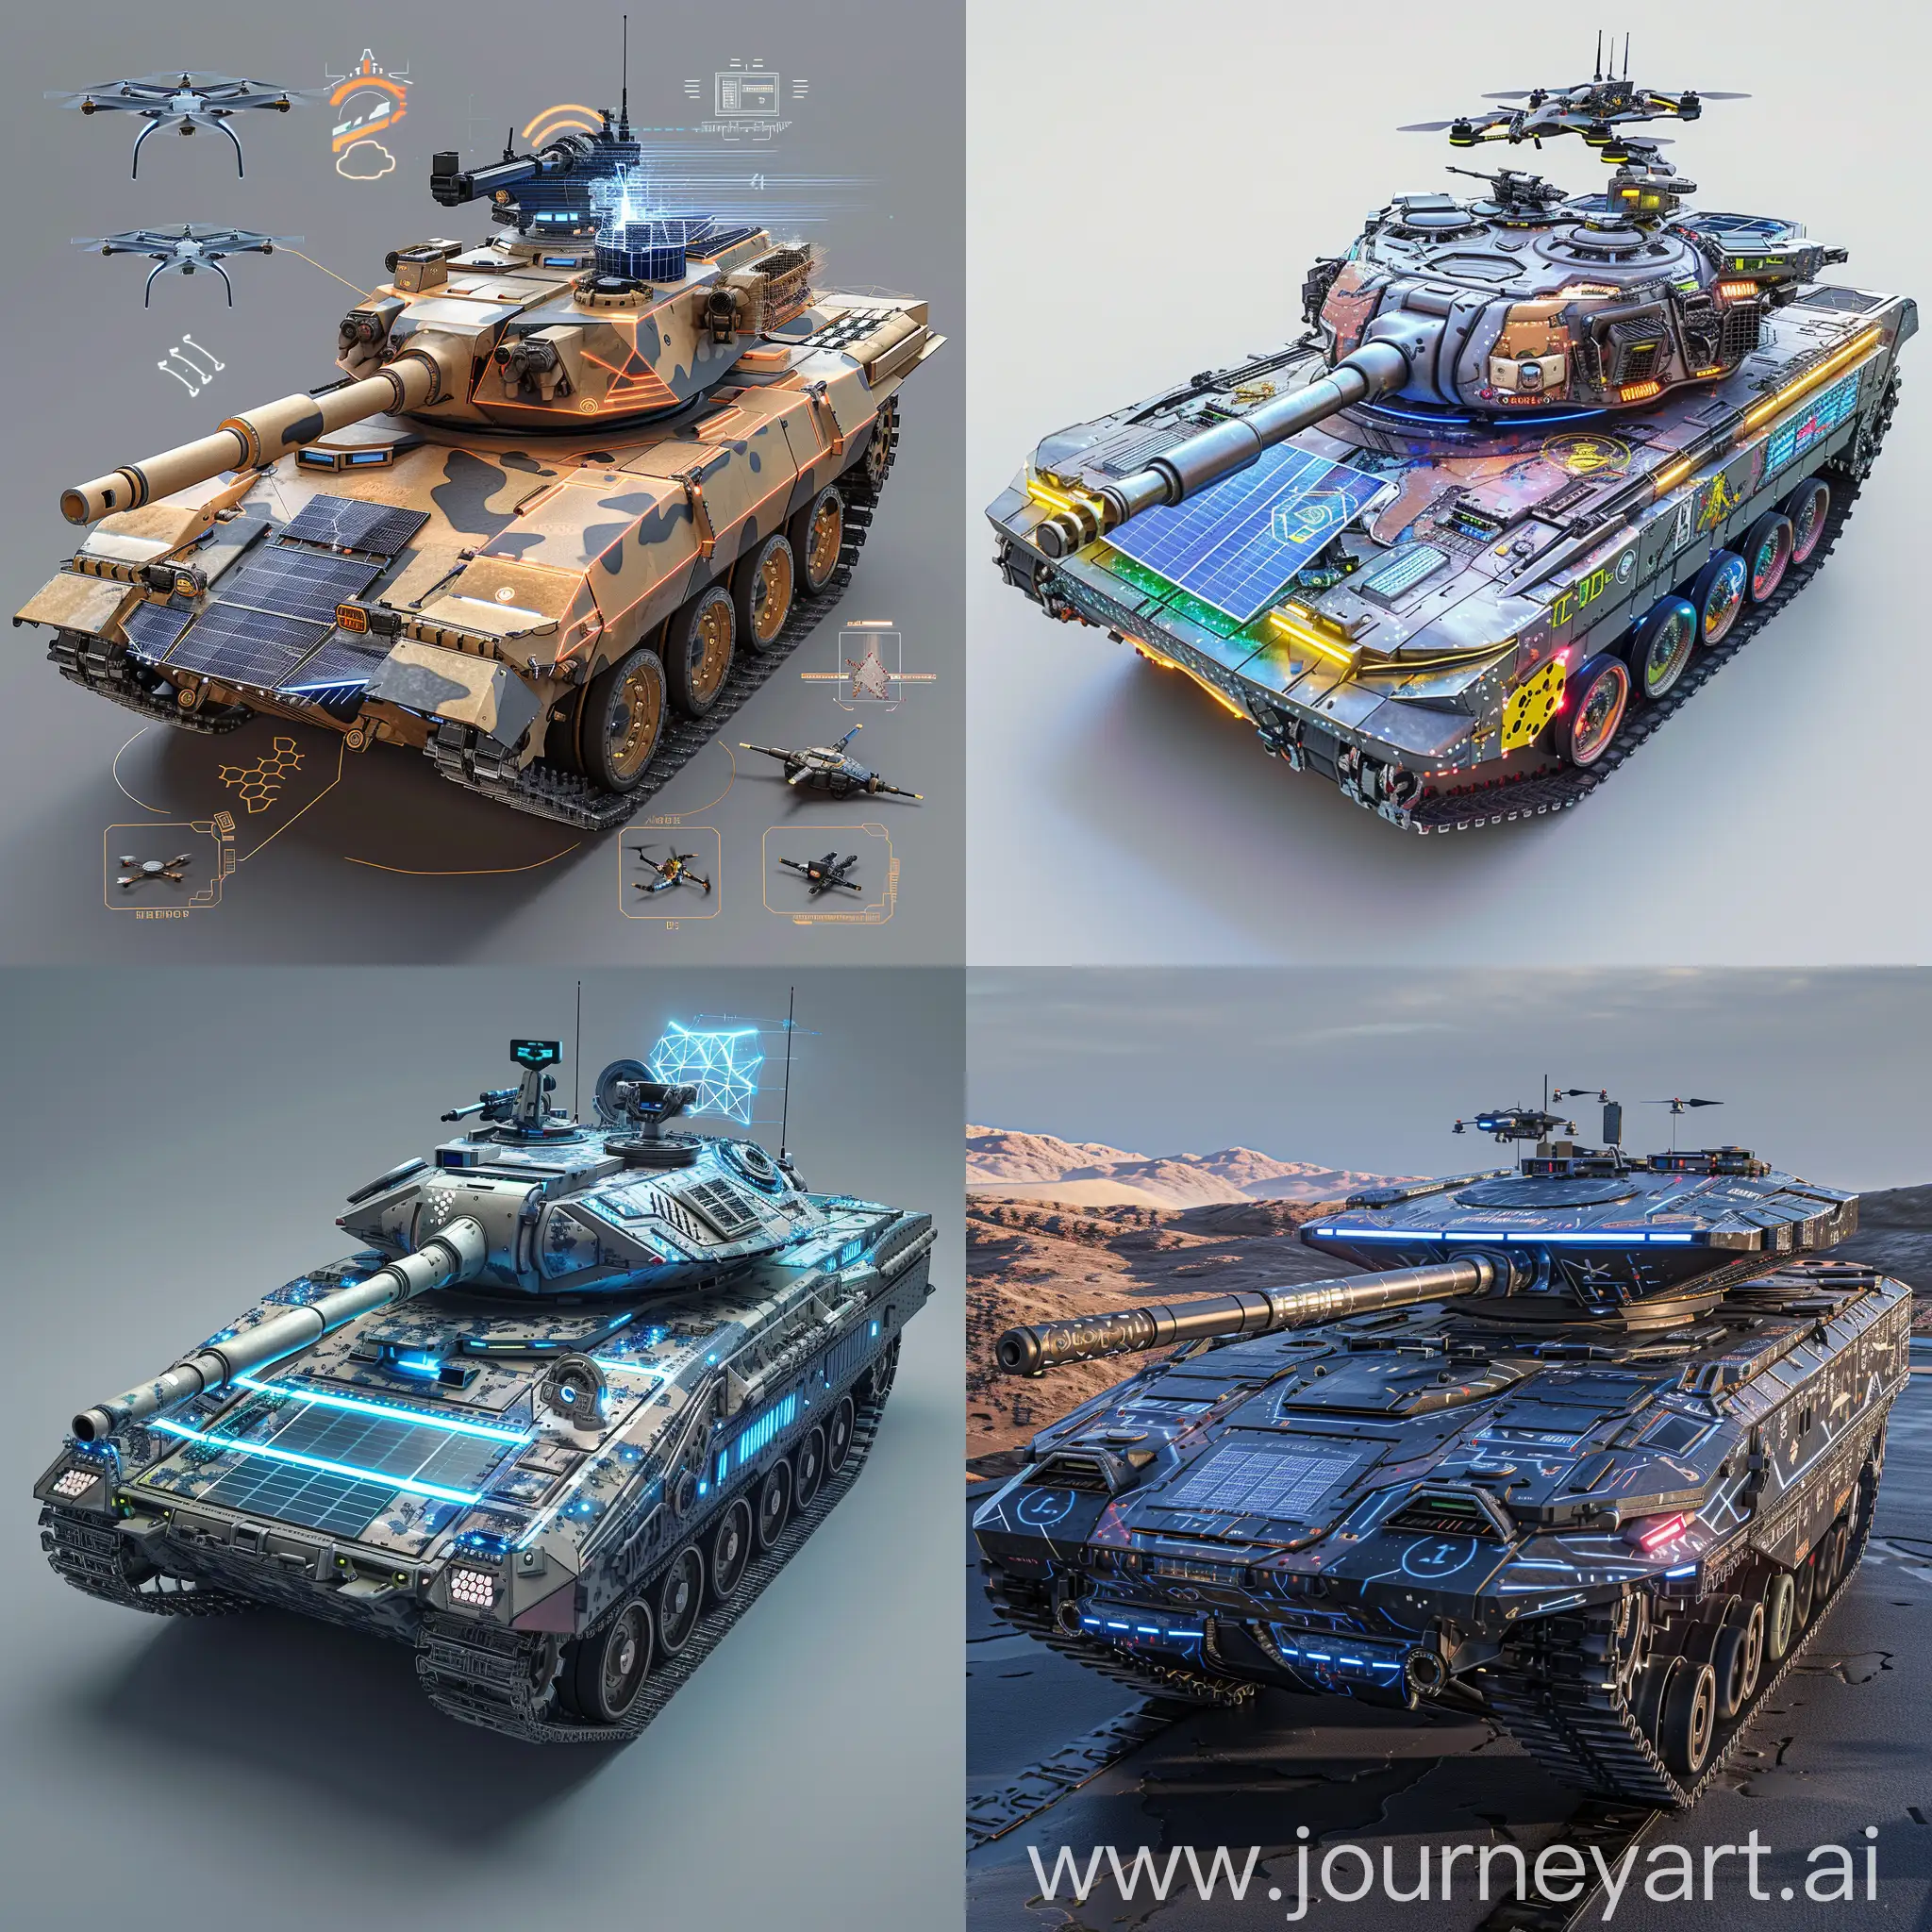 Futuristic-Tank-with-AIDriven-Command-System-and-Energy-Shield-Technology